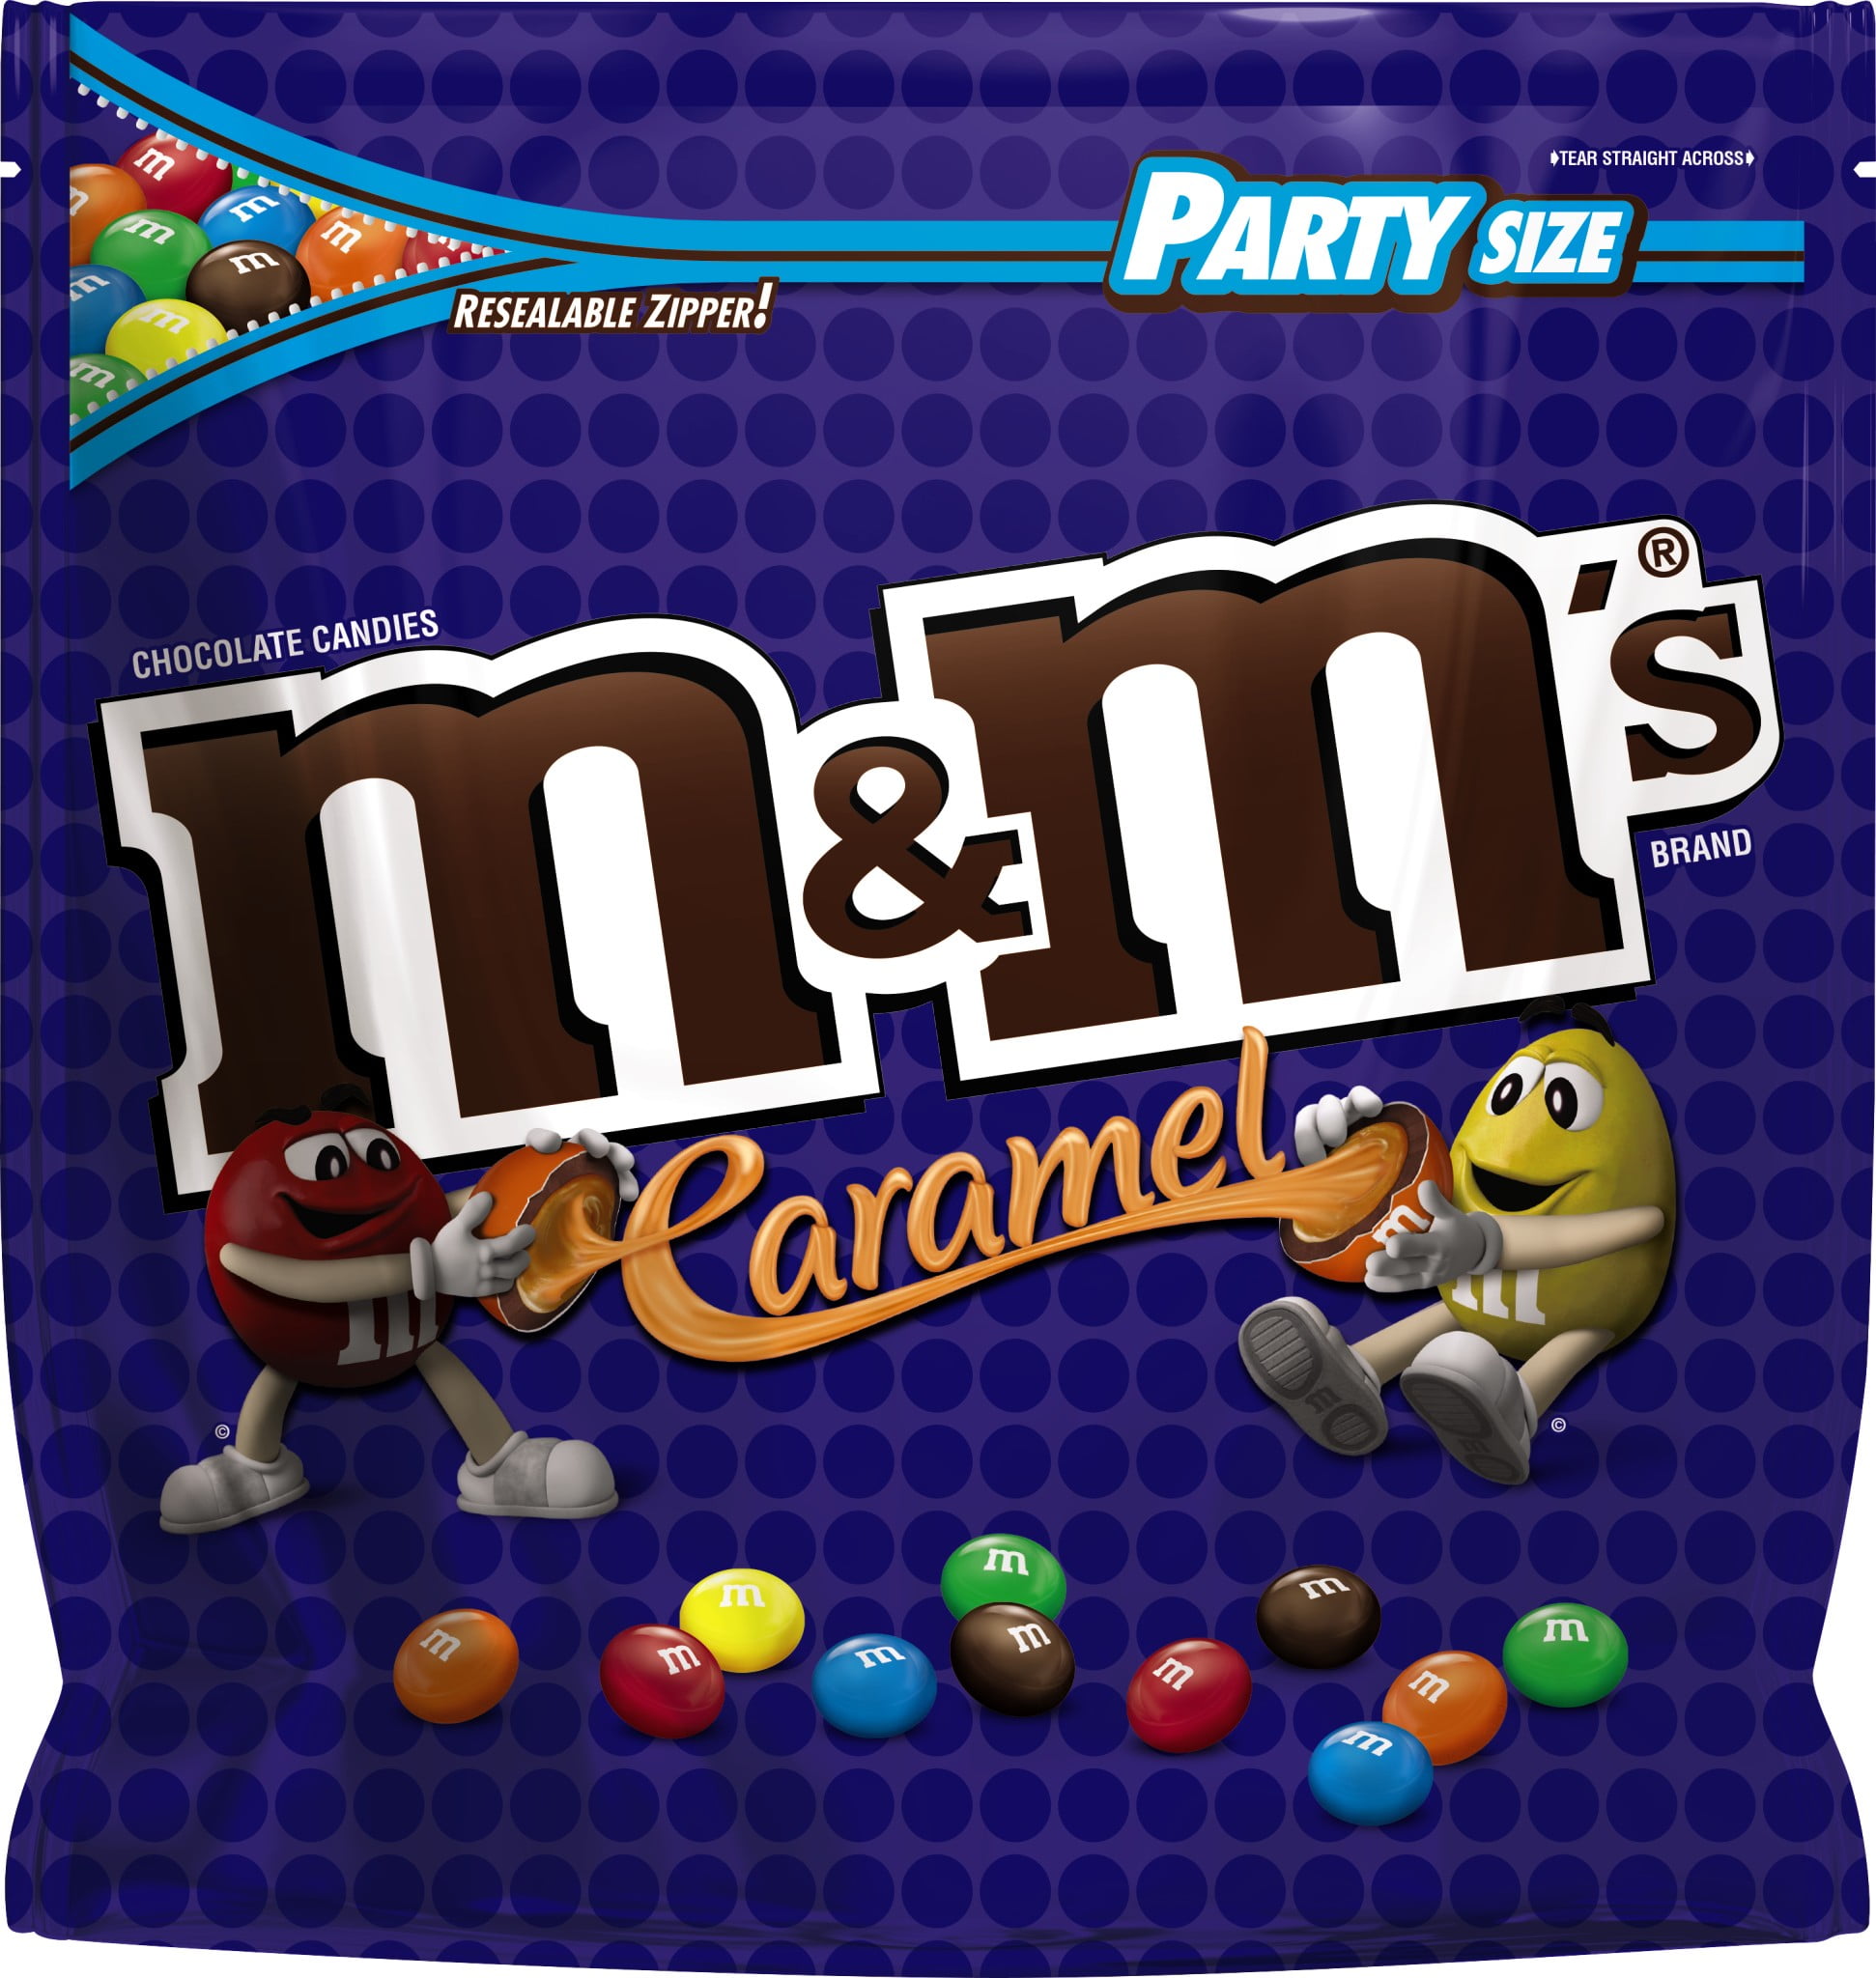 M&M'S Caramel Milk Chocolate Candy, Party Size, 34 oz Bag, Packaged Candy